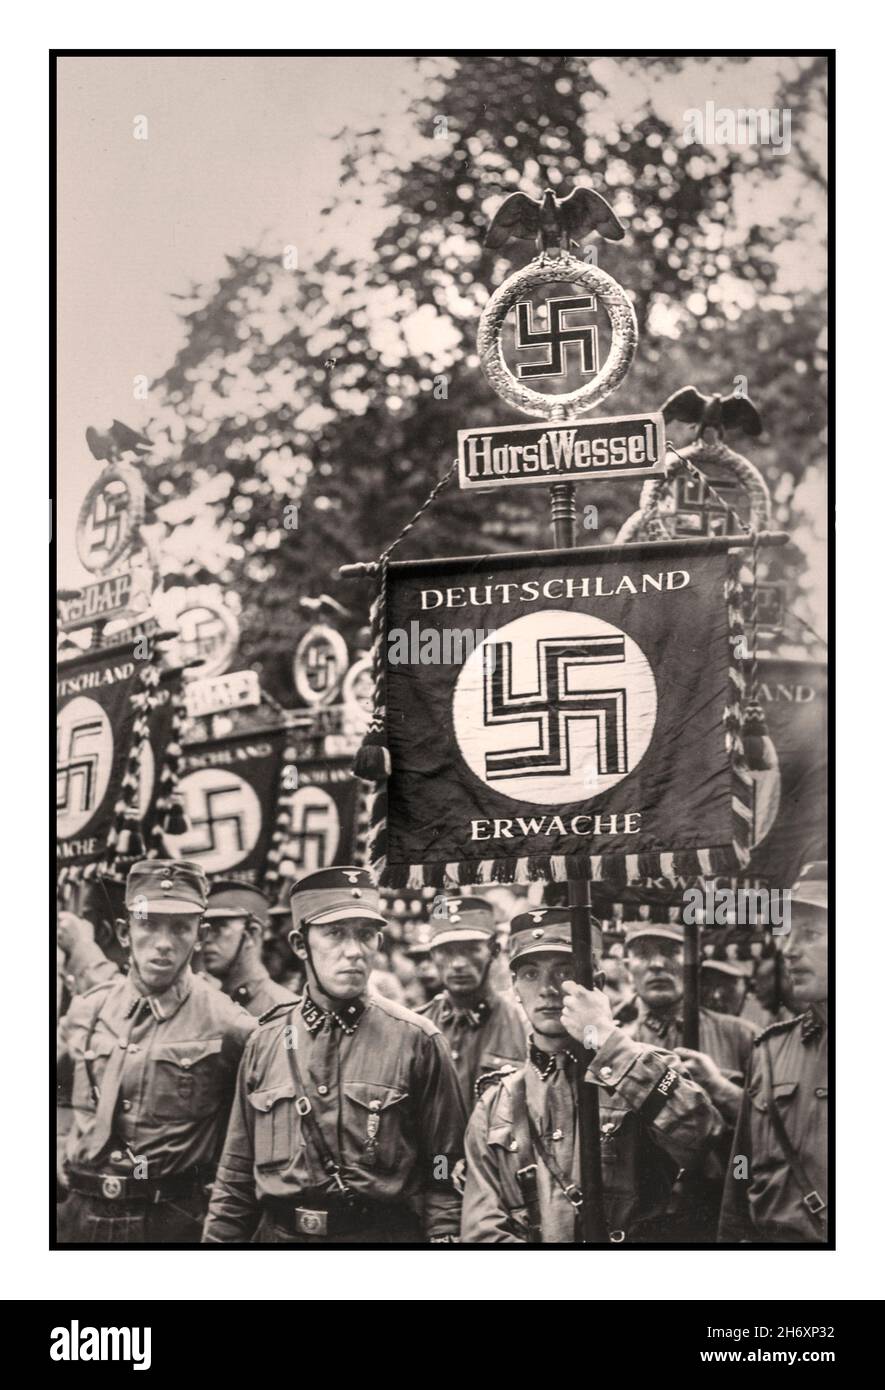 1933 Nazi Germany Reichsparteitag 1930s Nurnberg Rally with Die Horst Wessel Standarte DEUTSCHLAND ERWACHE 'Germany Awakes'  Horst Ludwig Georg Erich Wessel (9 October 1907 – 23 February 1930) was a Berlin Sturmführer ('Assault Leader', the lowest commissioned officer rank) of the Sturmabteilung (SA), the Nazi Party's stormtroopers. After his murder in 1930, he was made into a martyr and hero for the Nazi cause by Propaganda Minister Joseph Goebbels. Stock Photo